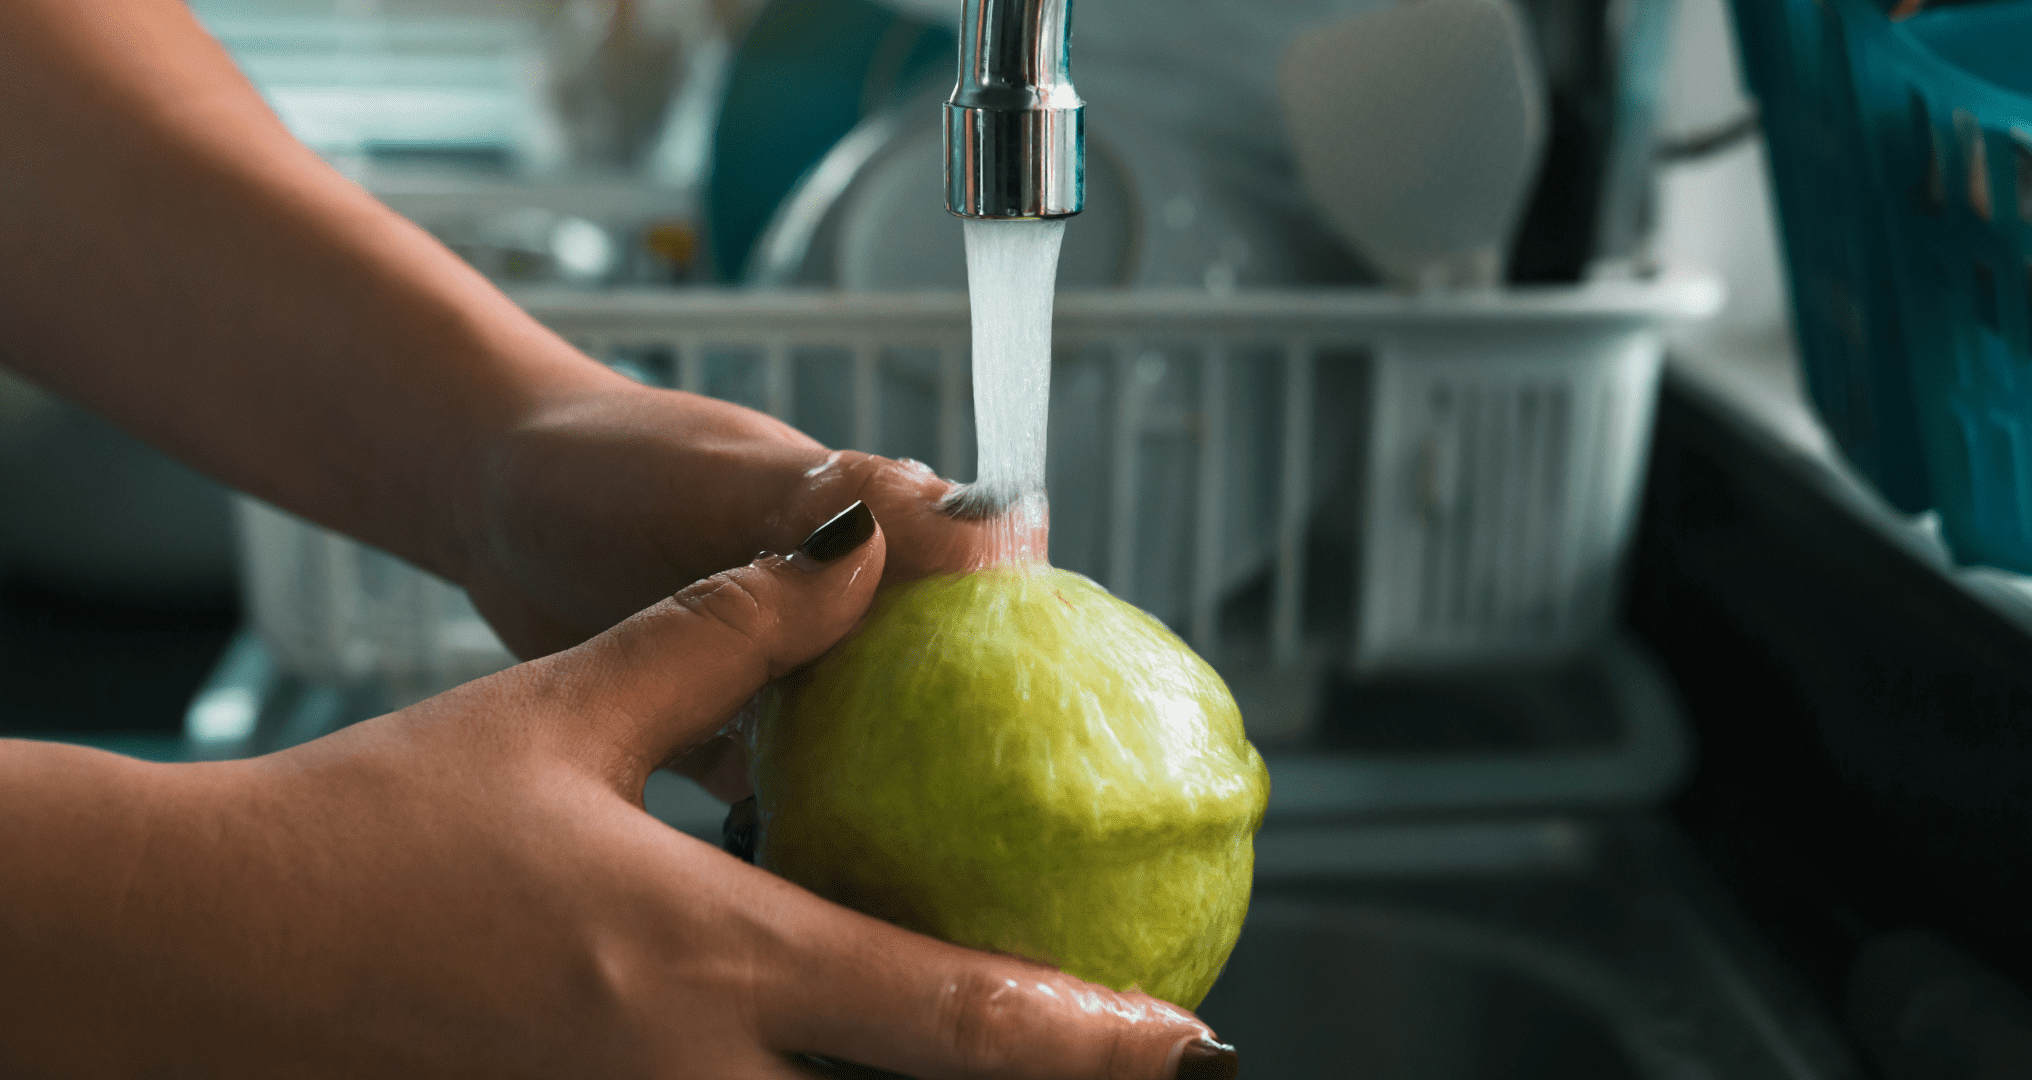 washing a guava with tap water in texas